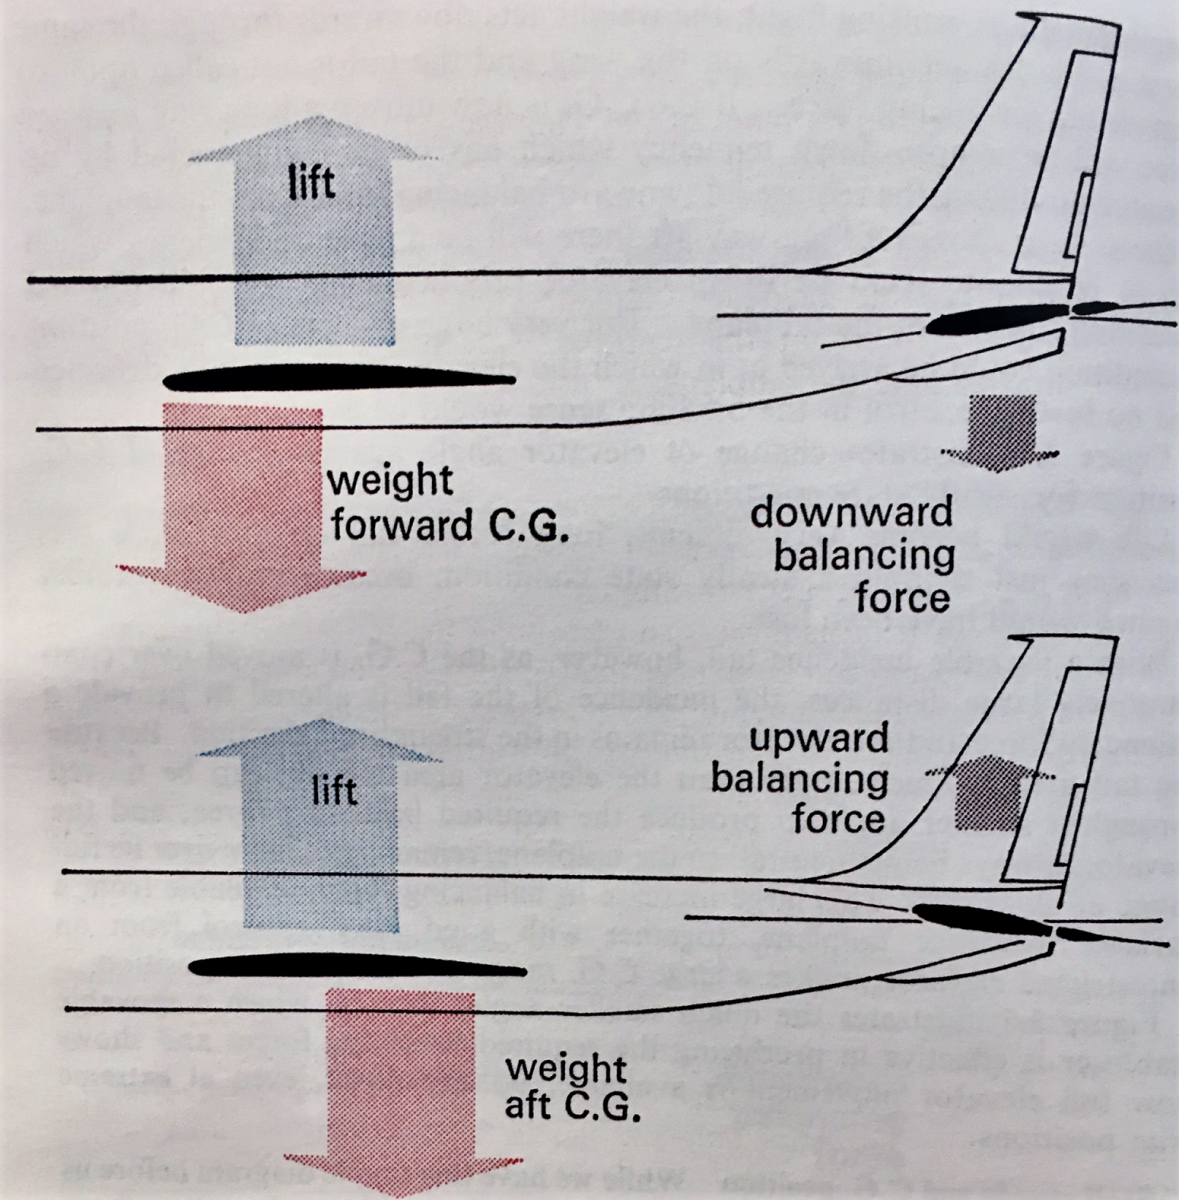 Aircraft Pitch trim - How does a 'Stab Trim' or 'Trimmable Horizontal stabilizer' work